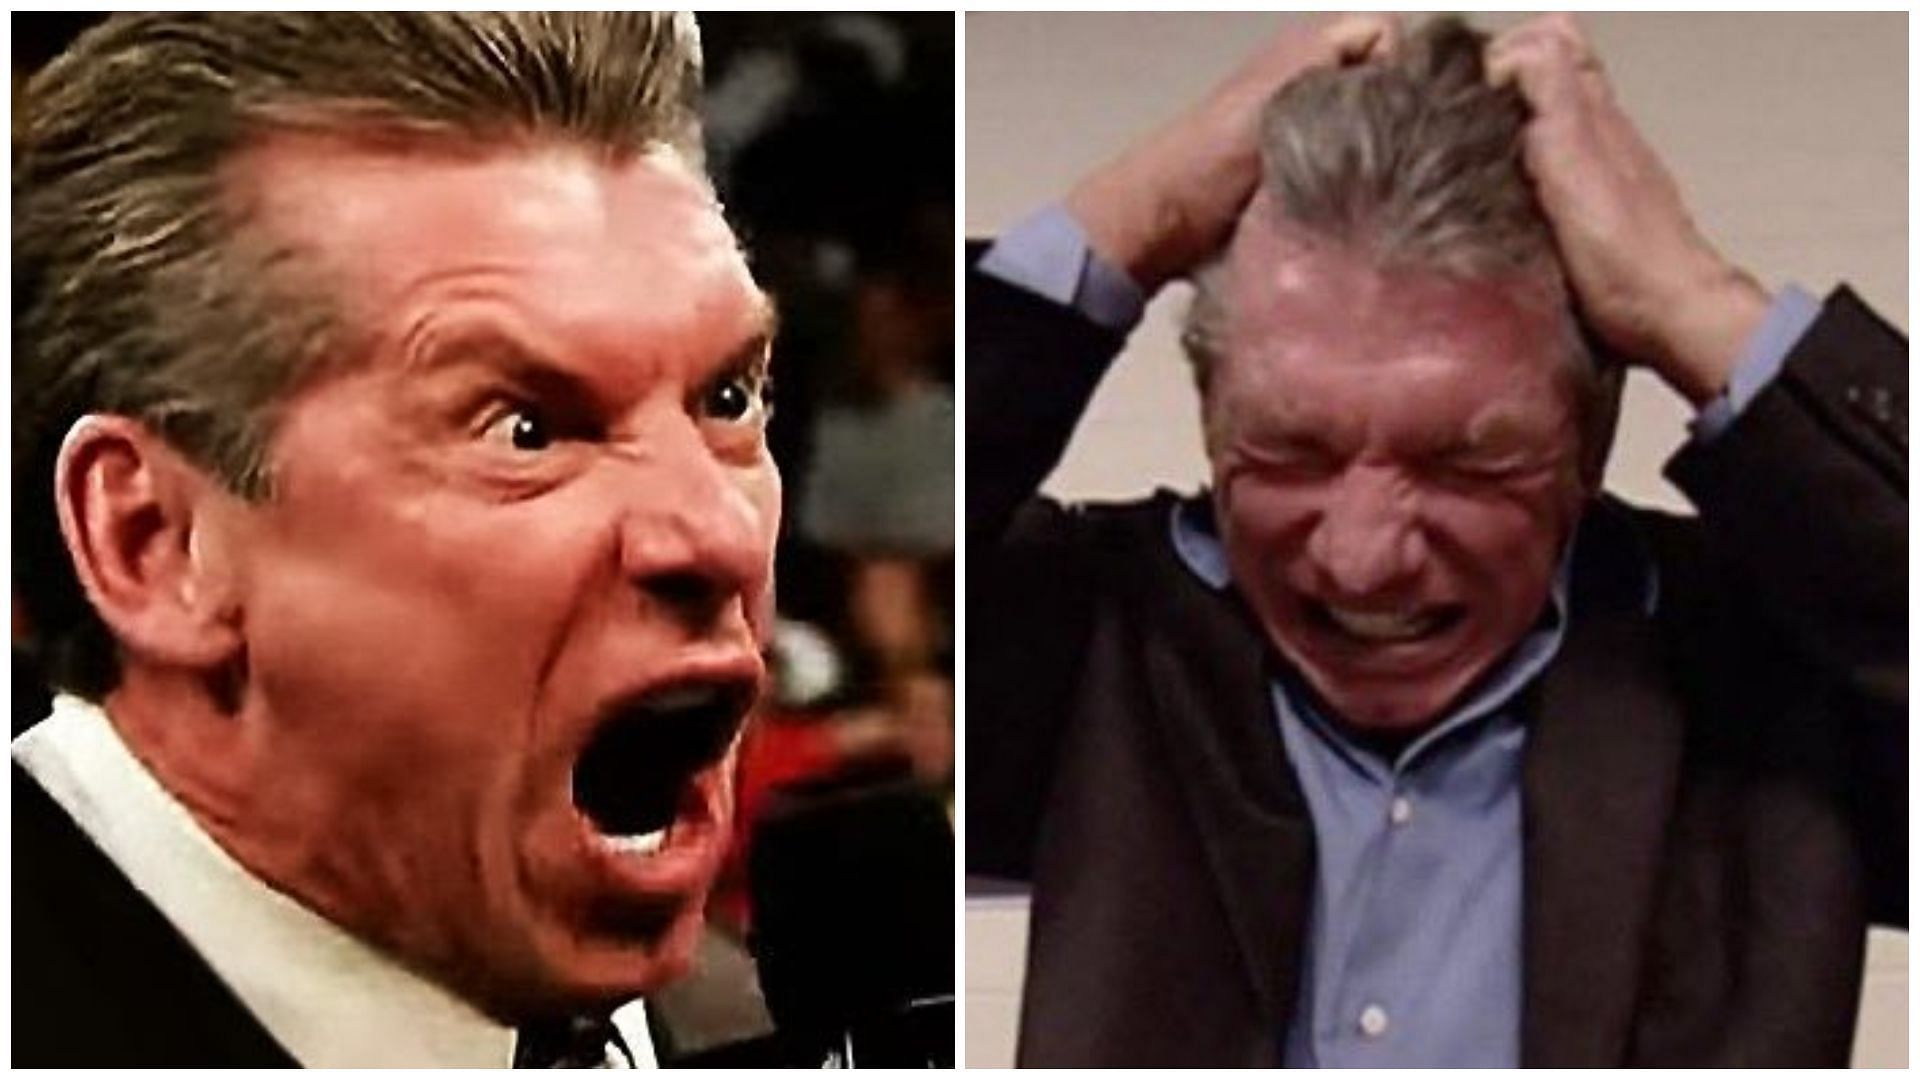 Vince McMahon recently returned to the WWE